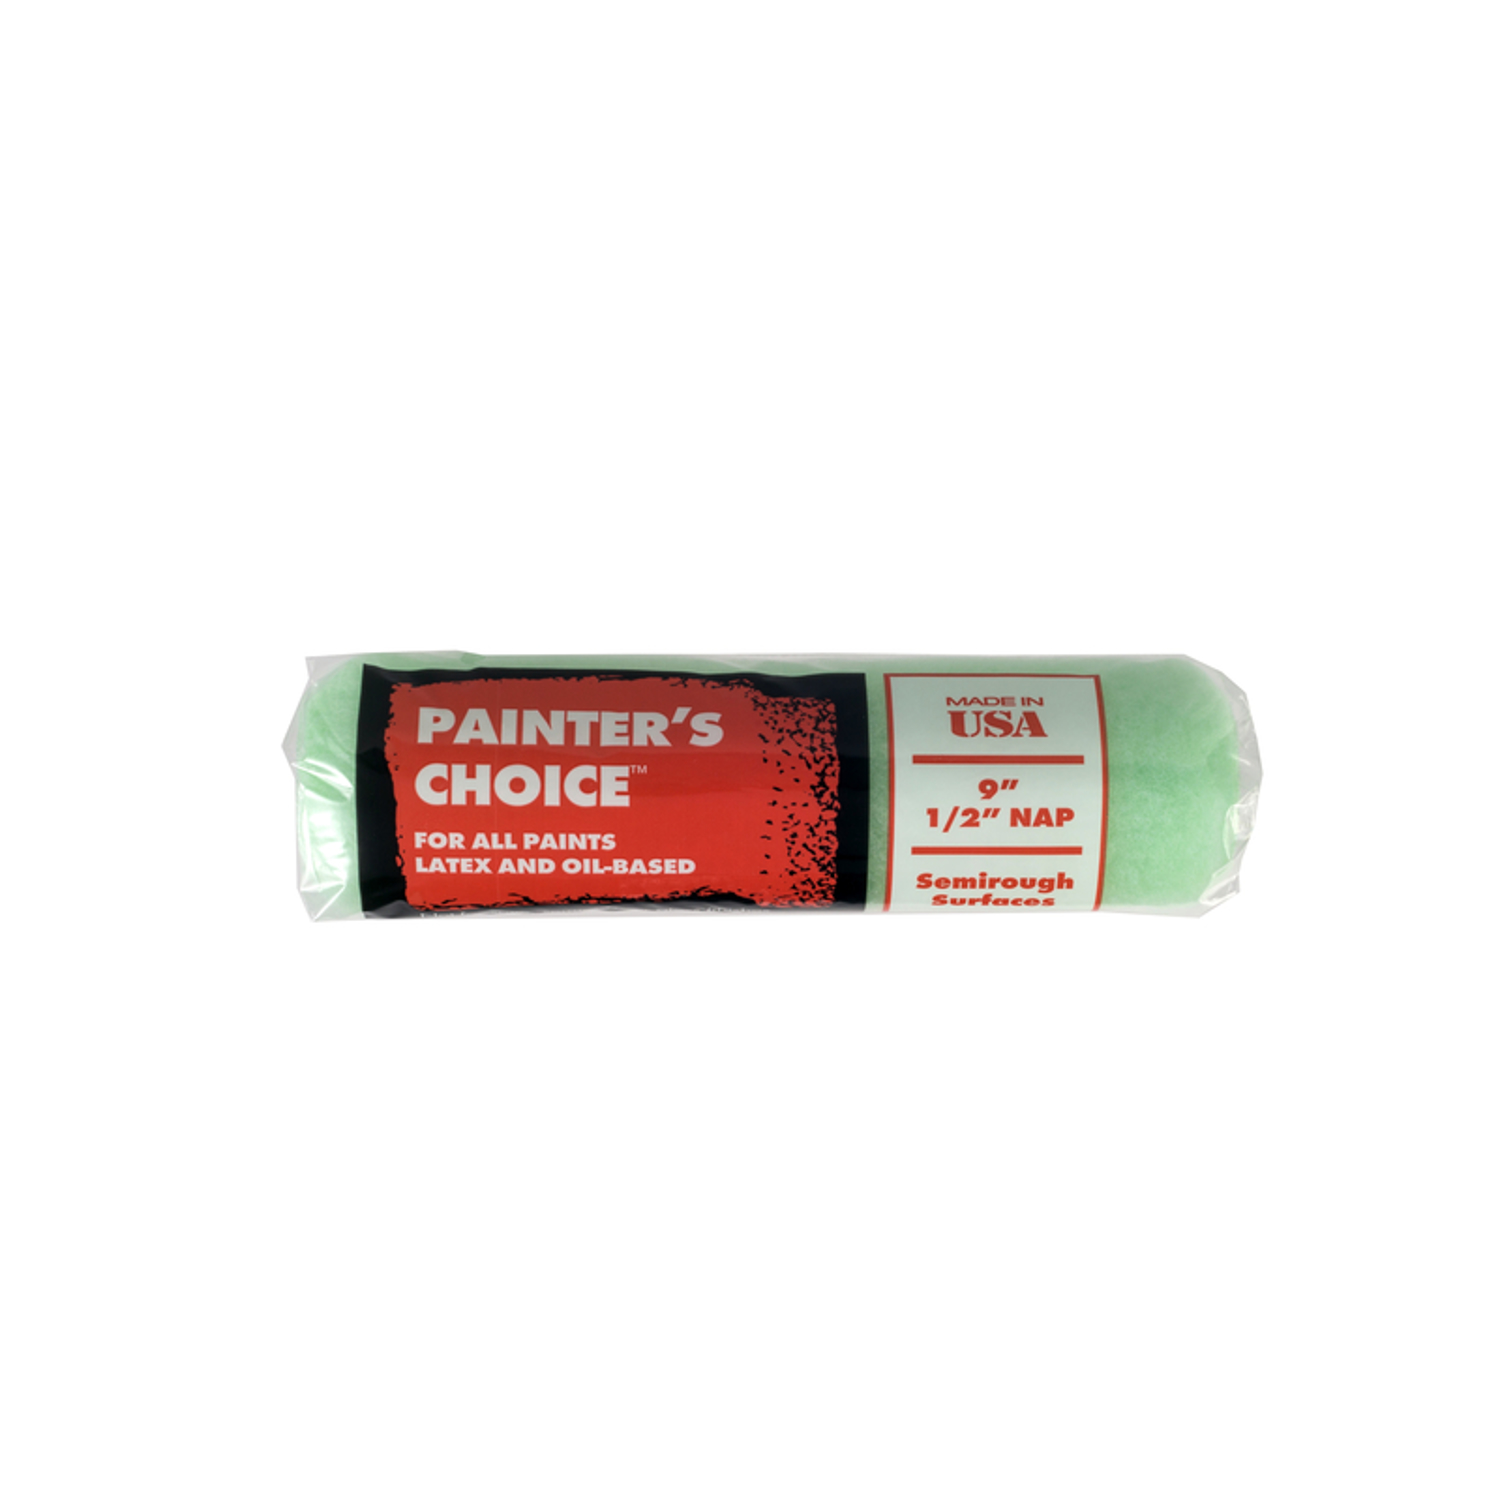 Photos - Putty Knife / Painting Tool Wooster Painter's Choice Fabric 9 in. W X 1/2 in. Regular Paint Roller Cov